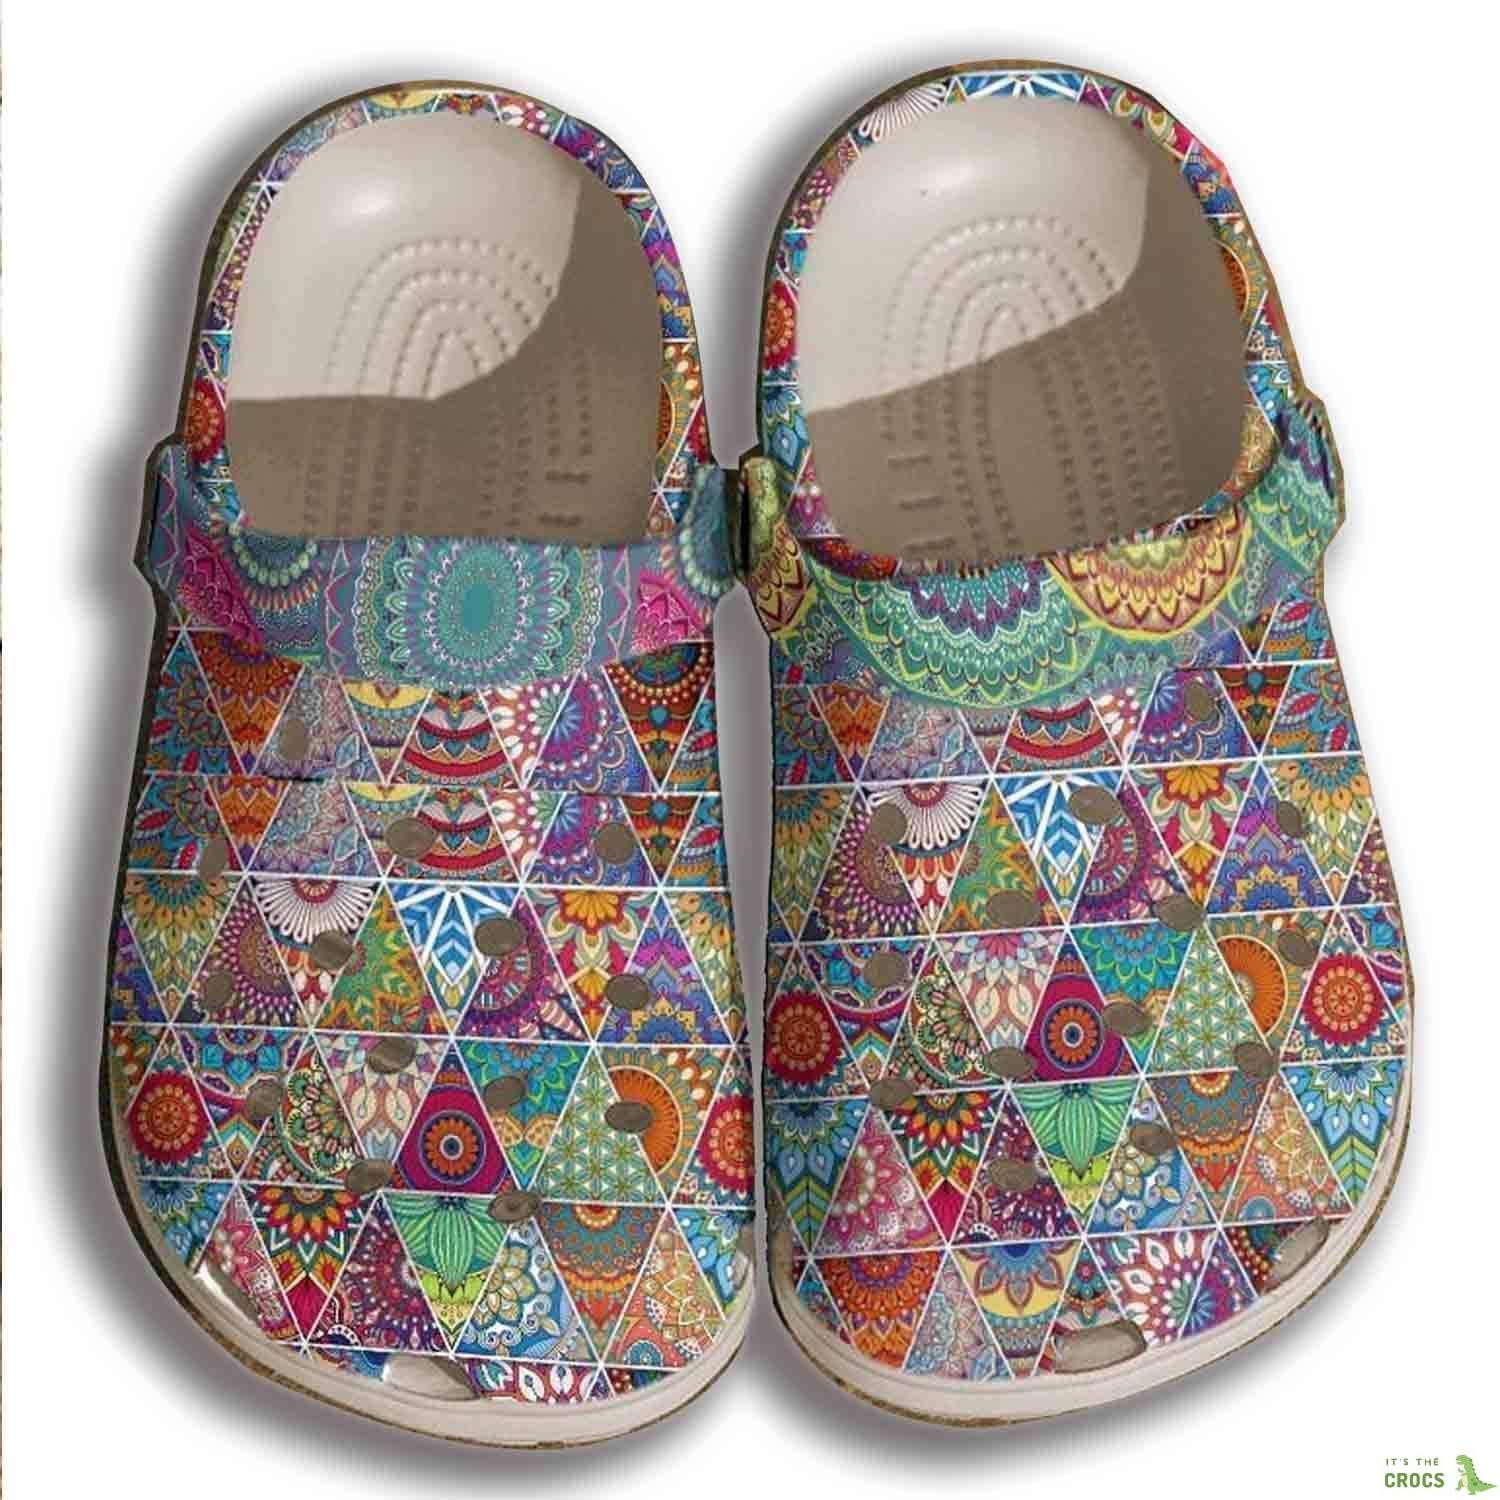 Hippie Bohemian Pattern Croc Shoes Men Women – Free Flower Shoes Crocbland Clog Gifts For Mother Day